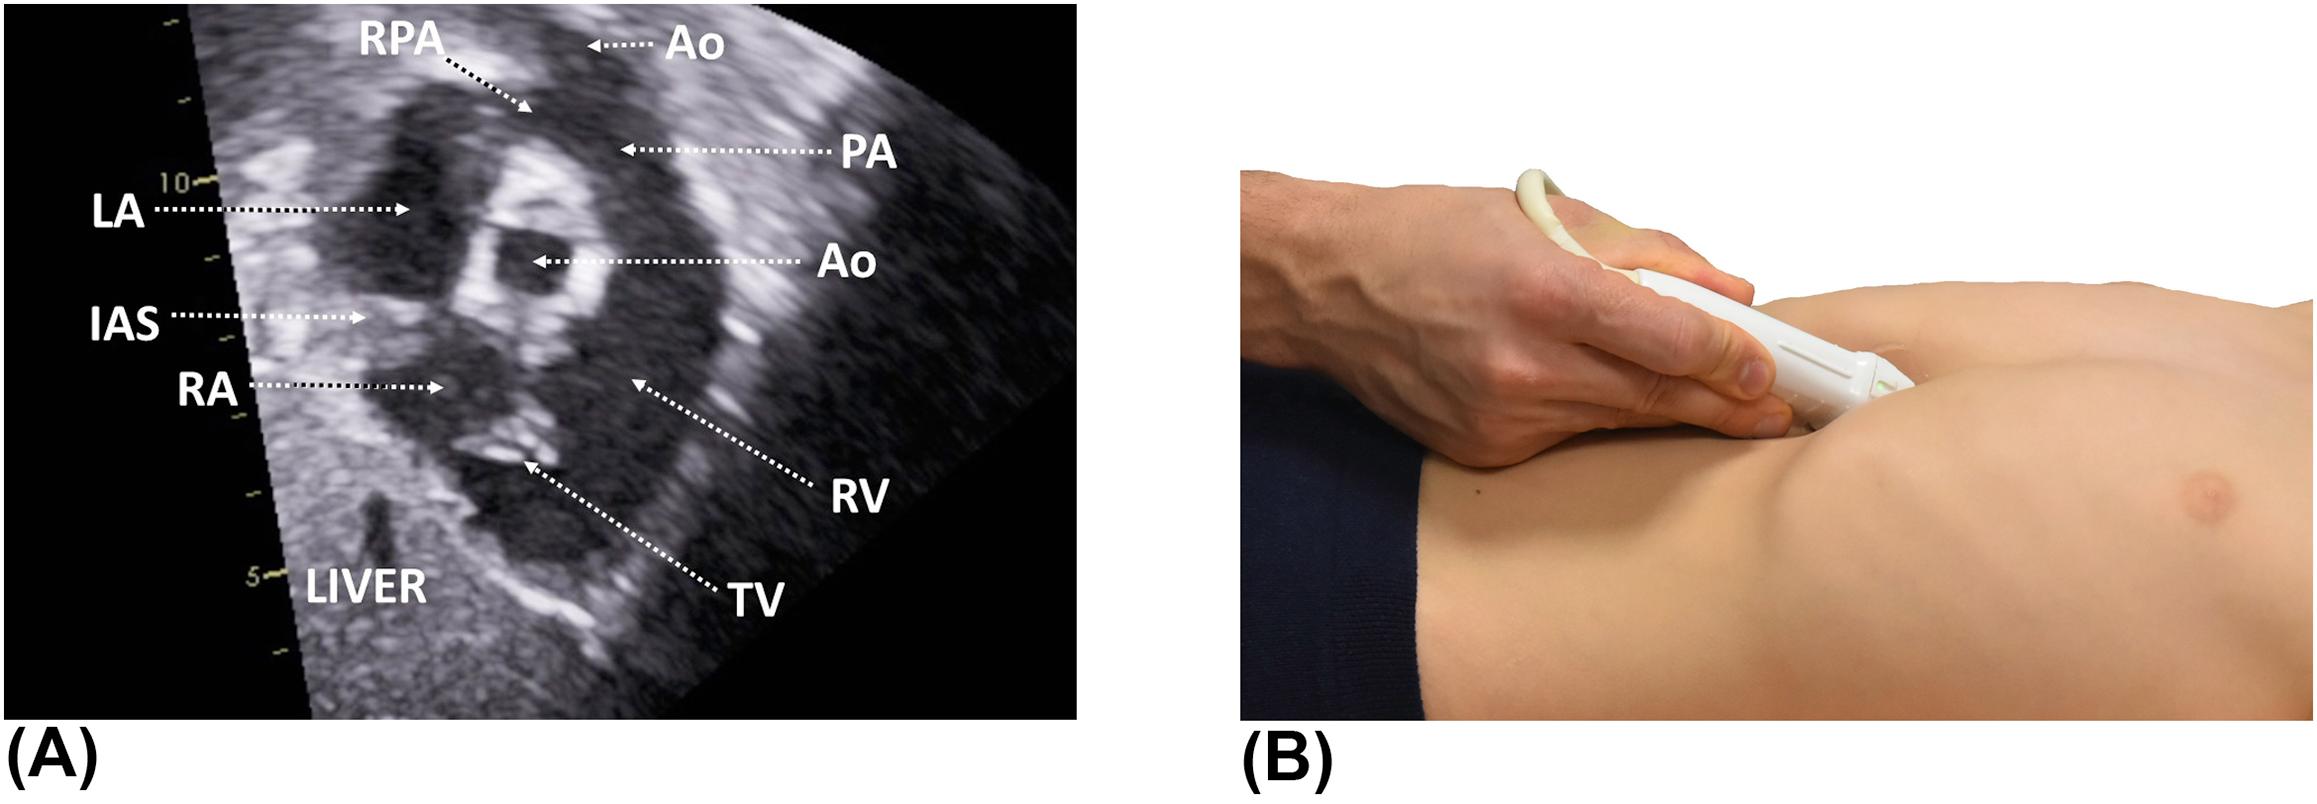 Figure 12, (A) Subcostal short-axis view demonstrating both atria, the tricuspid valve, and the entire right ventricular outflow tract. (B) This view is obtained by rotating the probe marker to the 1 o'clock position. The probe is slightly tilted to the patient's left. Ao , aorta; IAS , interatrial septum; LA , left atrium; LPA , left pulmonary artery; PA , pulmonary artery; RA , right atrium; RPA , right pulmonary artery; RV , right ventricle; TV , tricuspid valve.